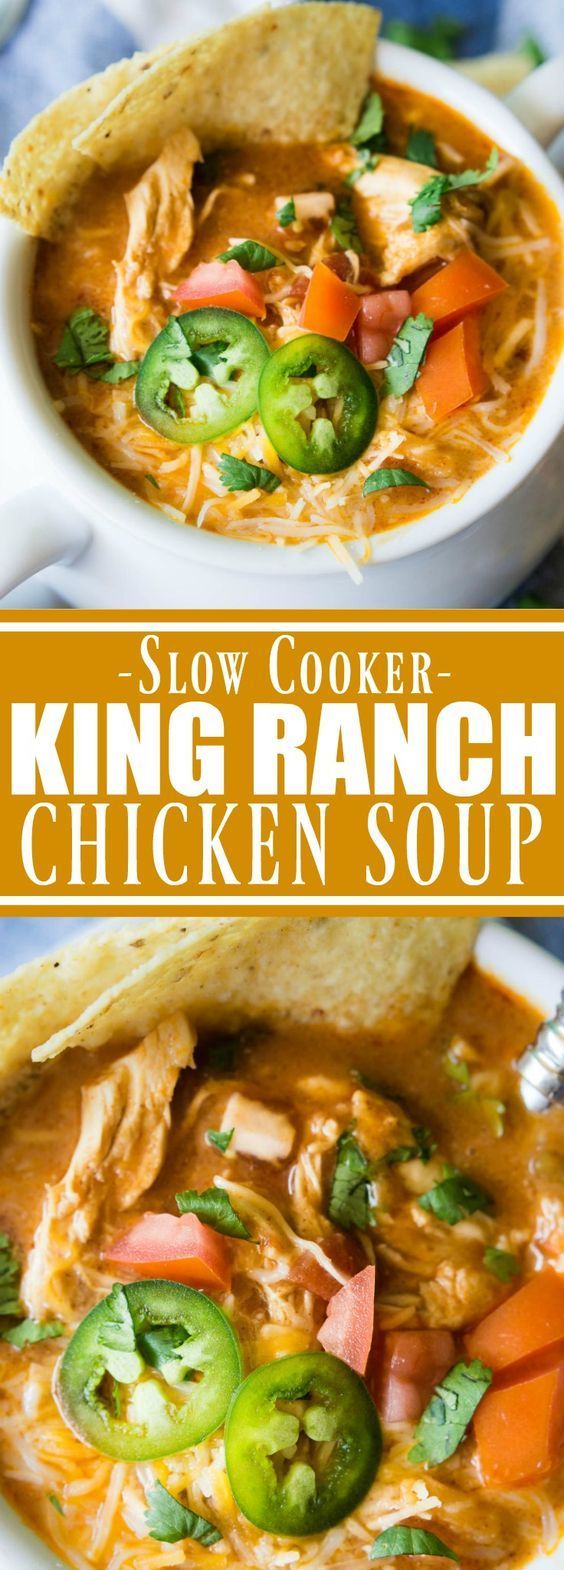 (Slow Cooker) King Ranch Chicken Soup